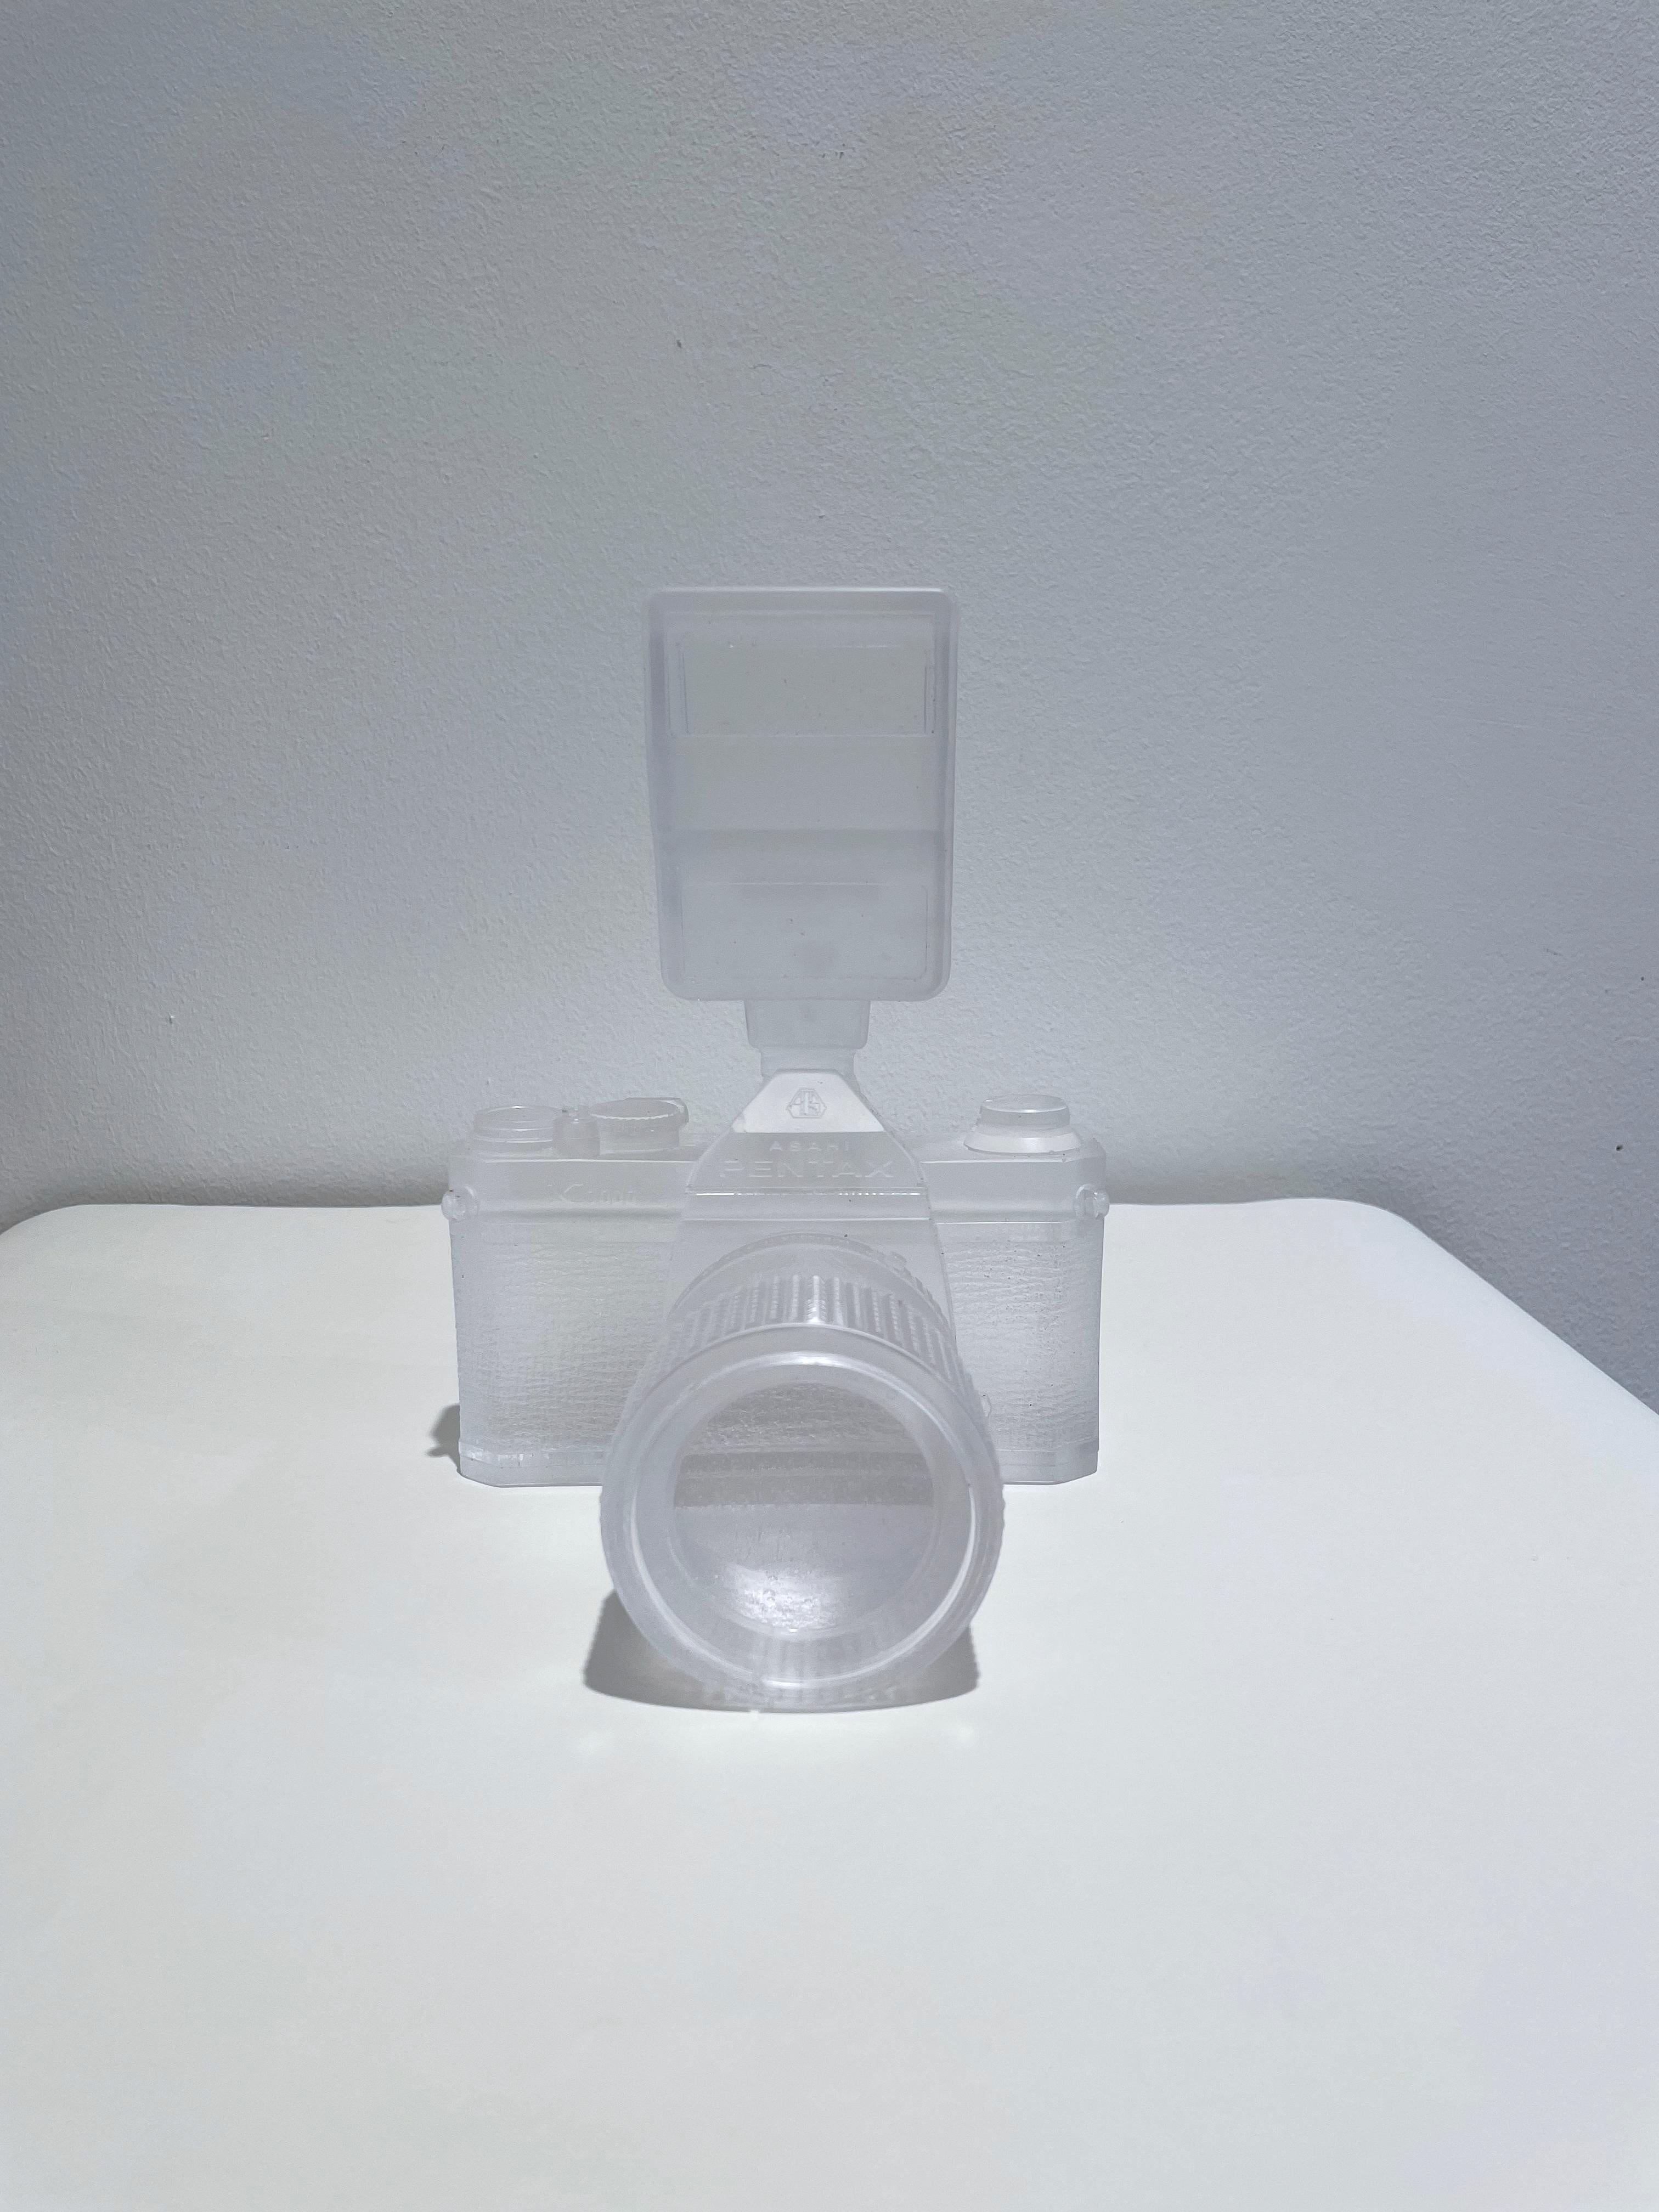 Crystal Relic 003 - Camera - Sculpture by Daniel Arsham